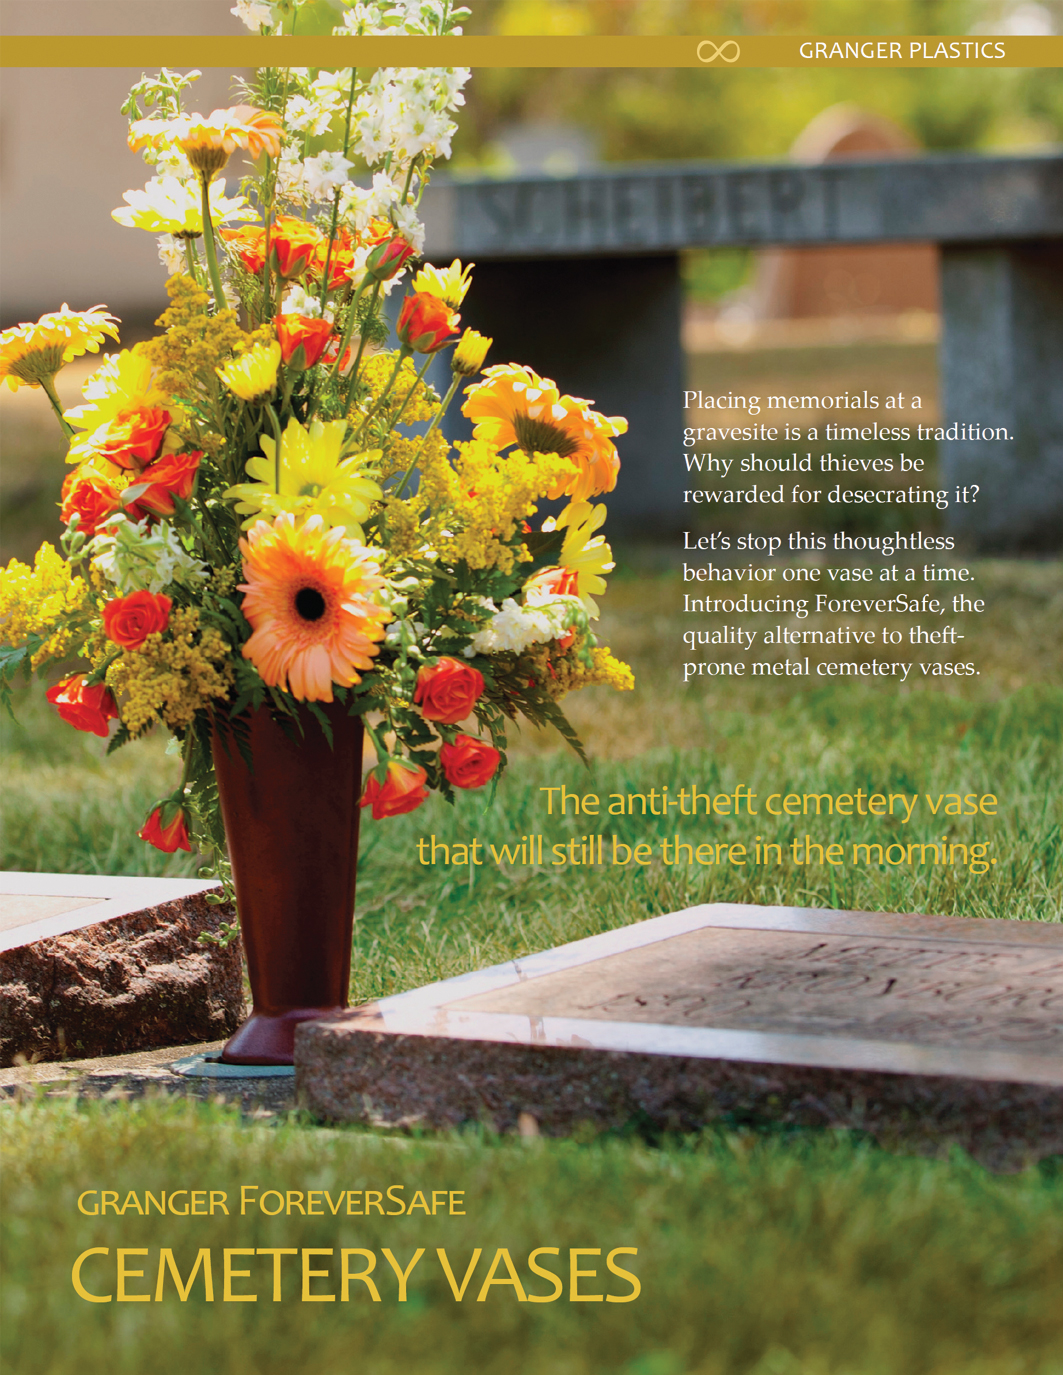 ForeverSafe Cemetery Vase Product Information